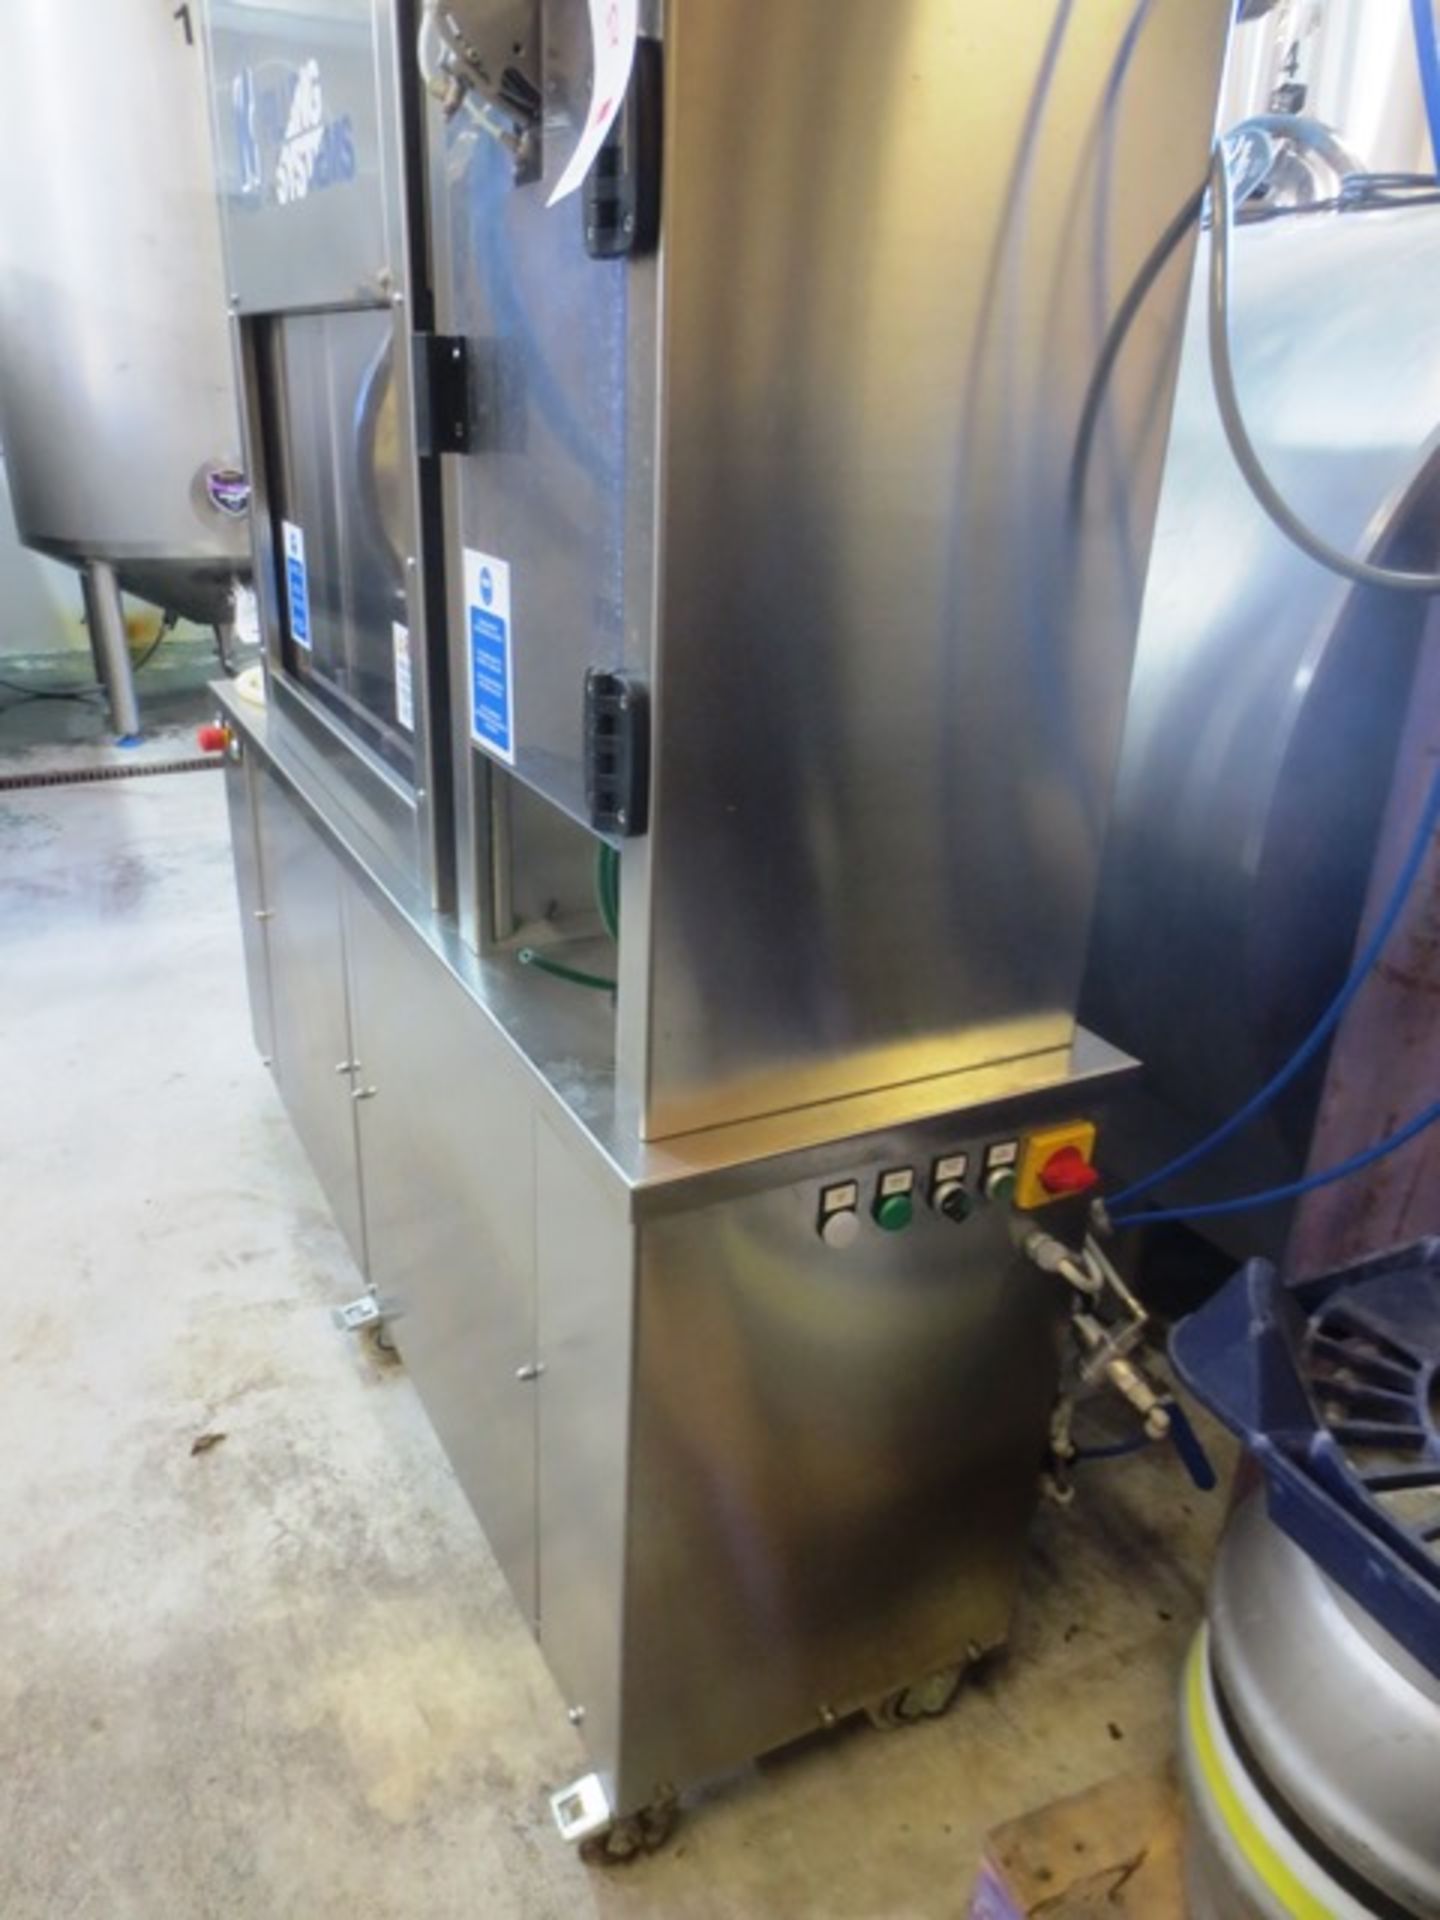 IC Filling Systems stainless steel 4 head bottle filler and capping station, model 441 Compact - Image 4 of 4